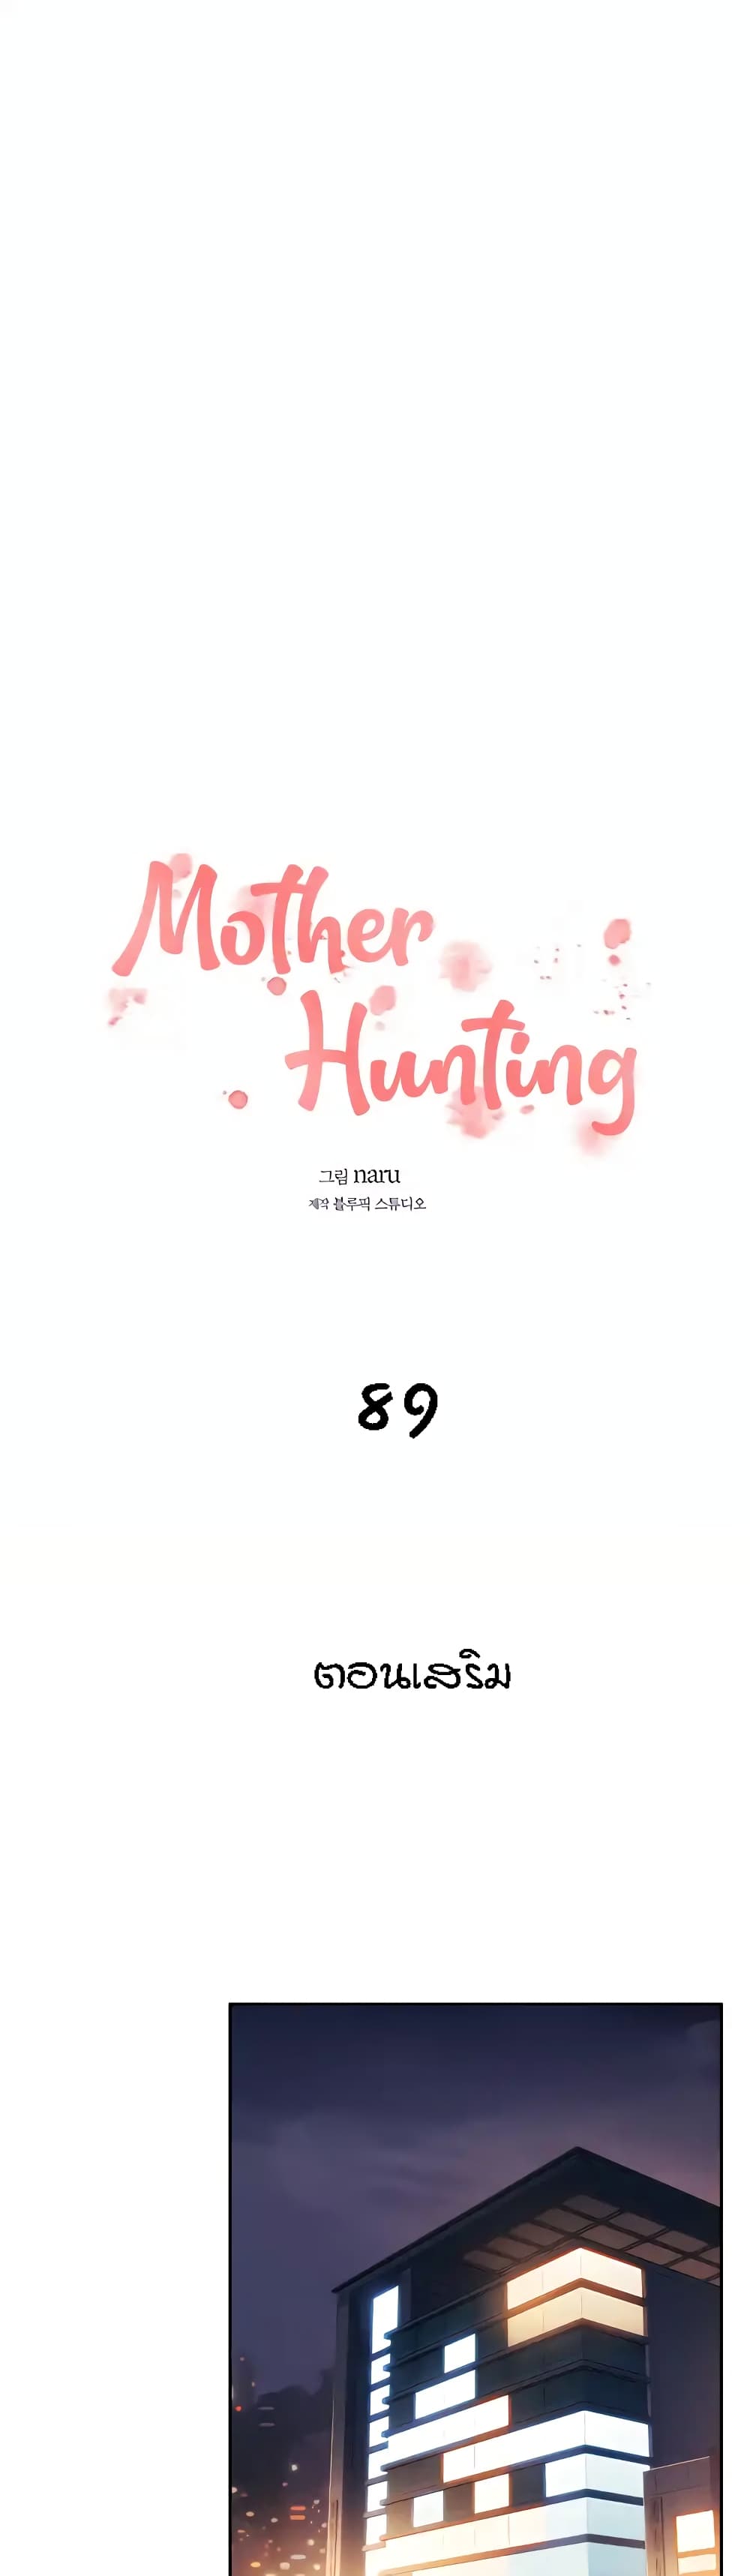 Mother Hunting 89 (1)